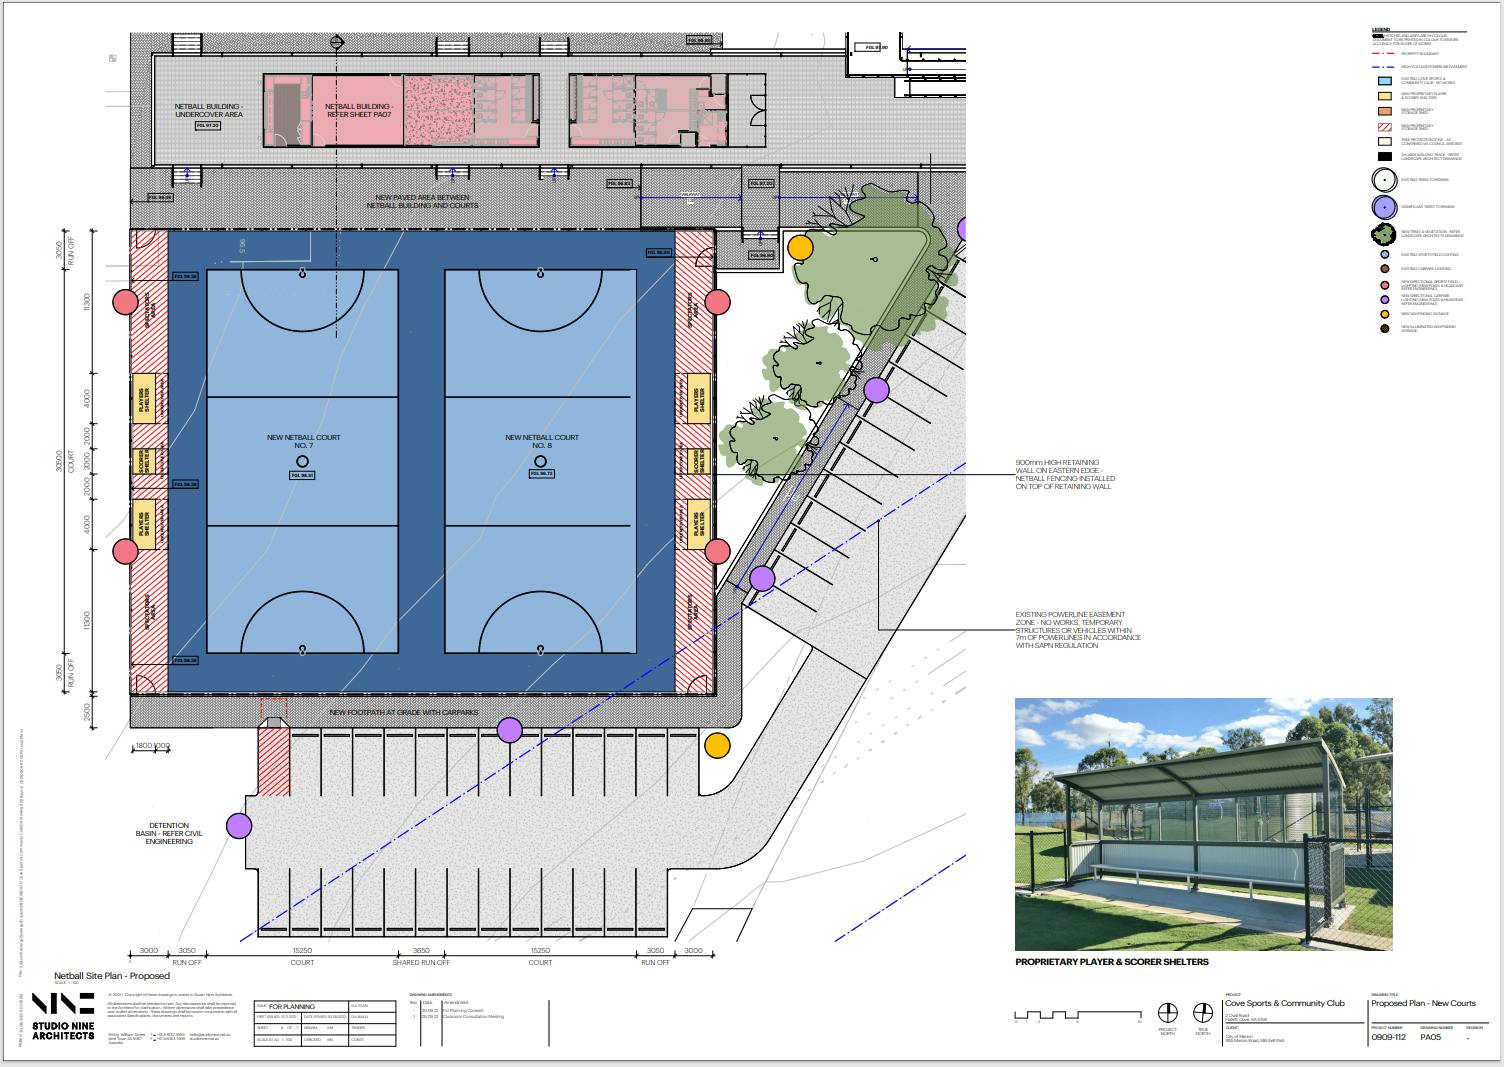 Netball Facilities New Courts.